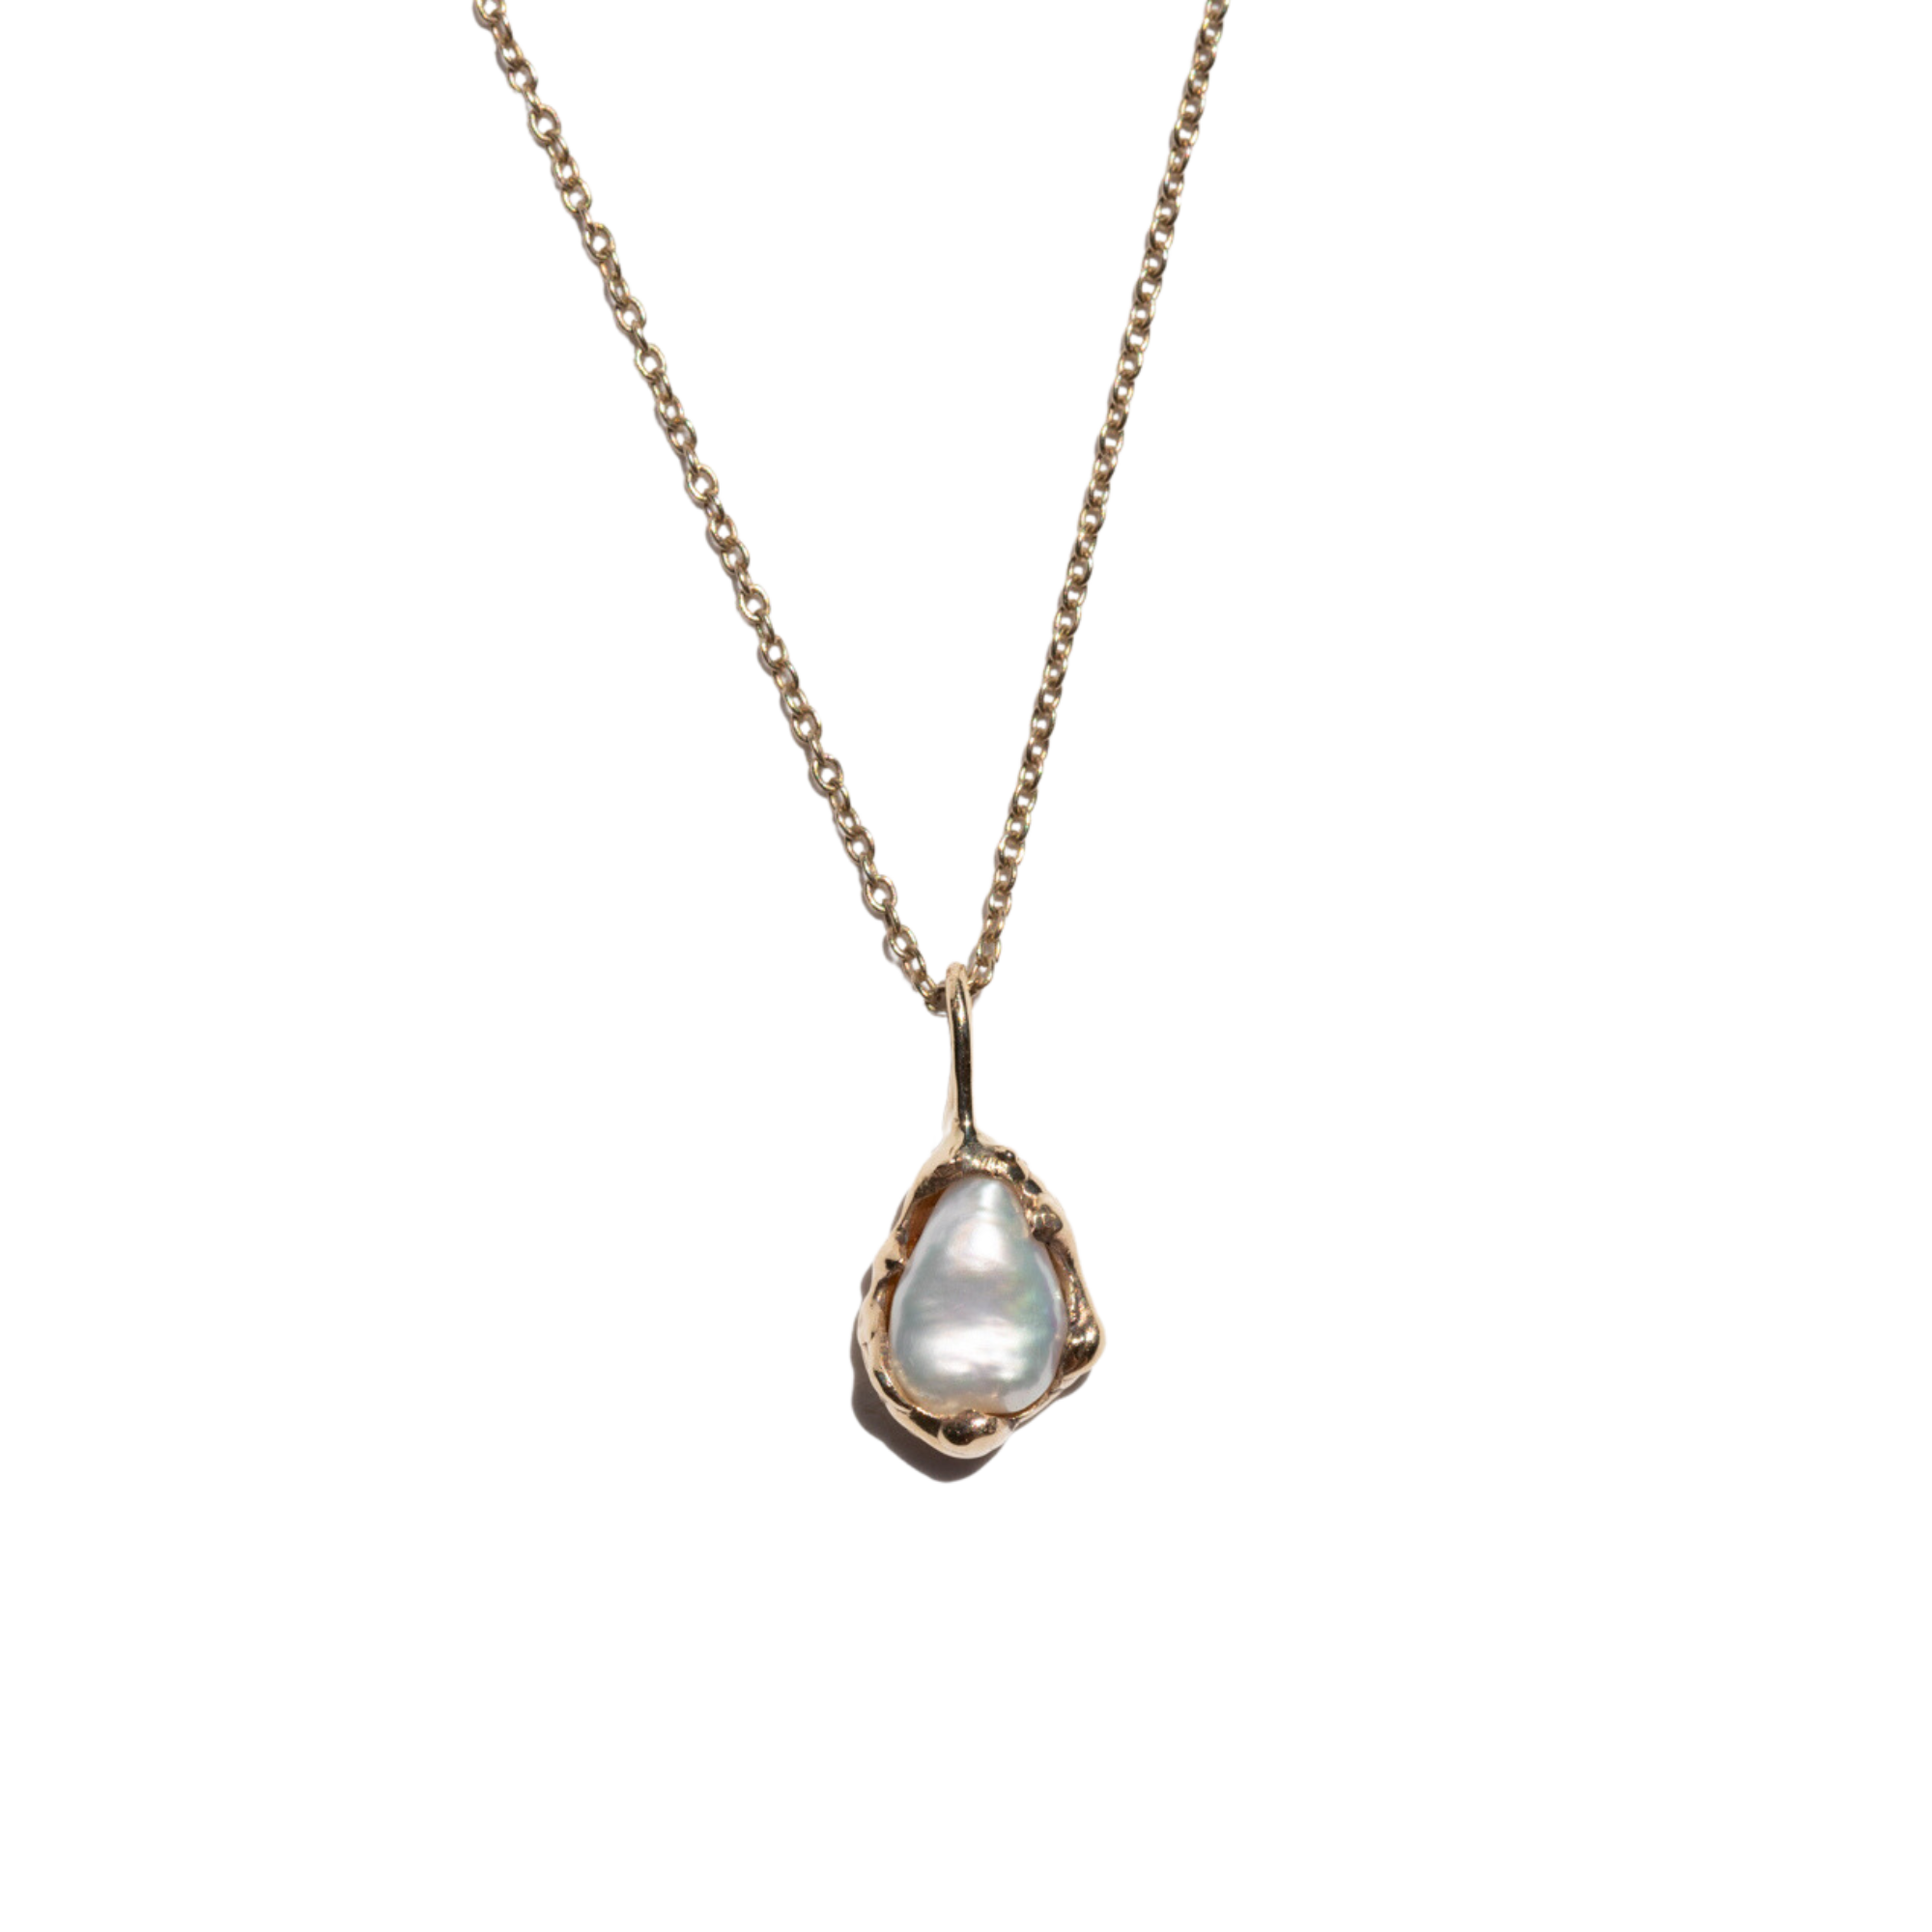 Gold Orb Pearl Necklace – Gorge Malorge